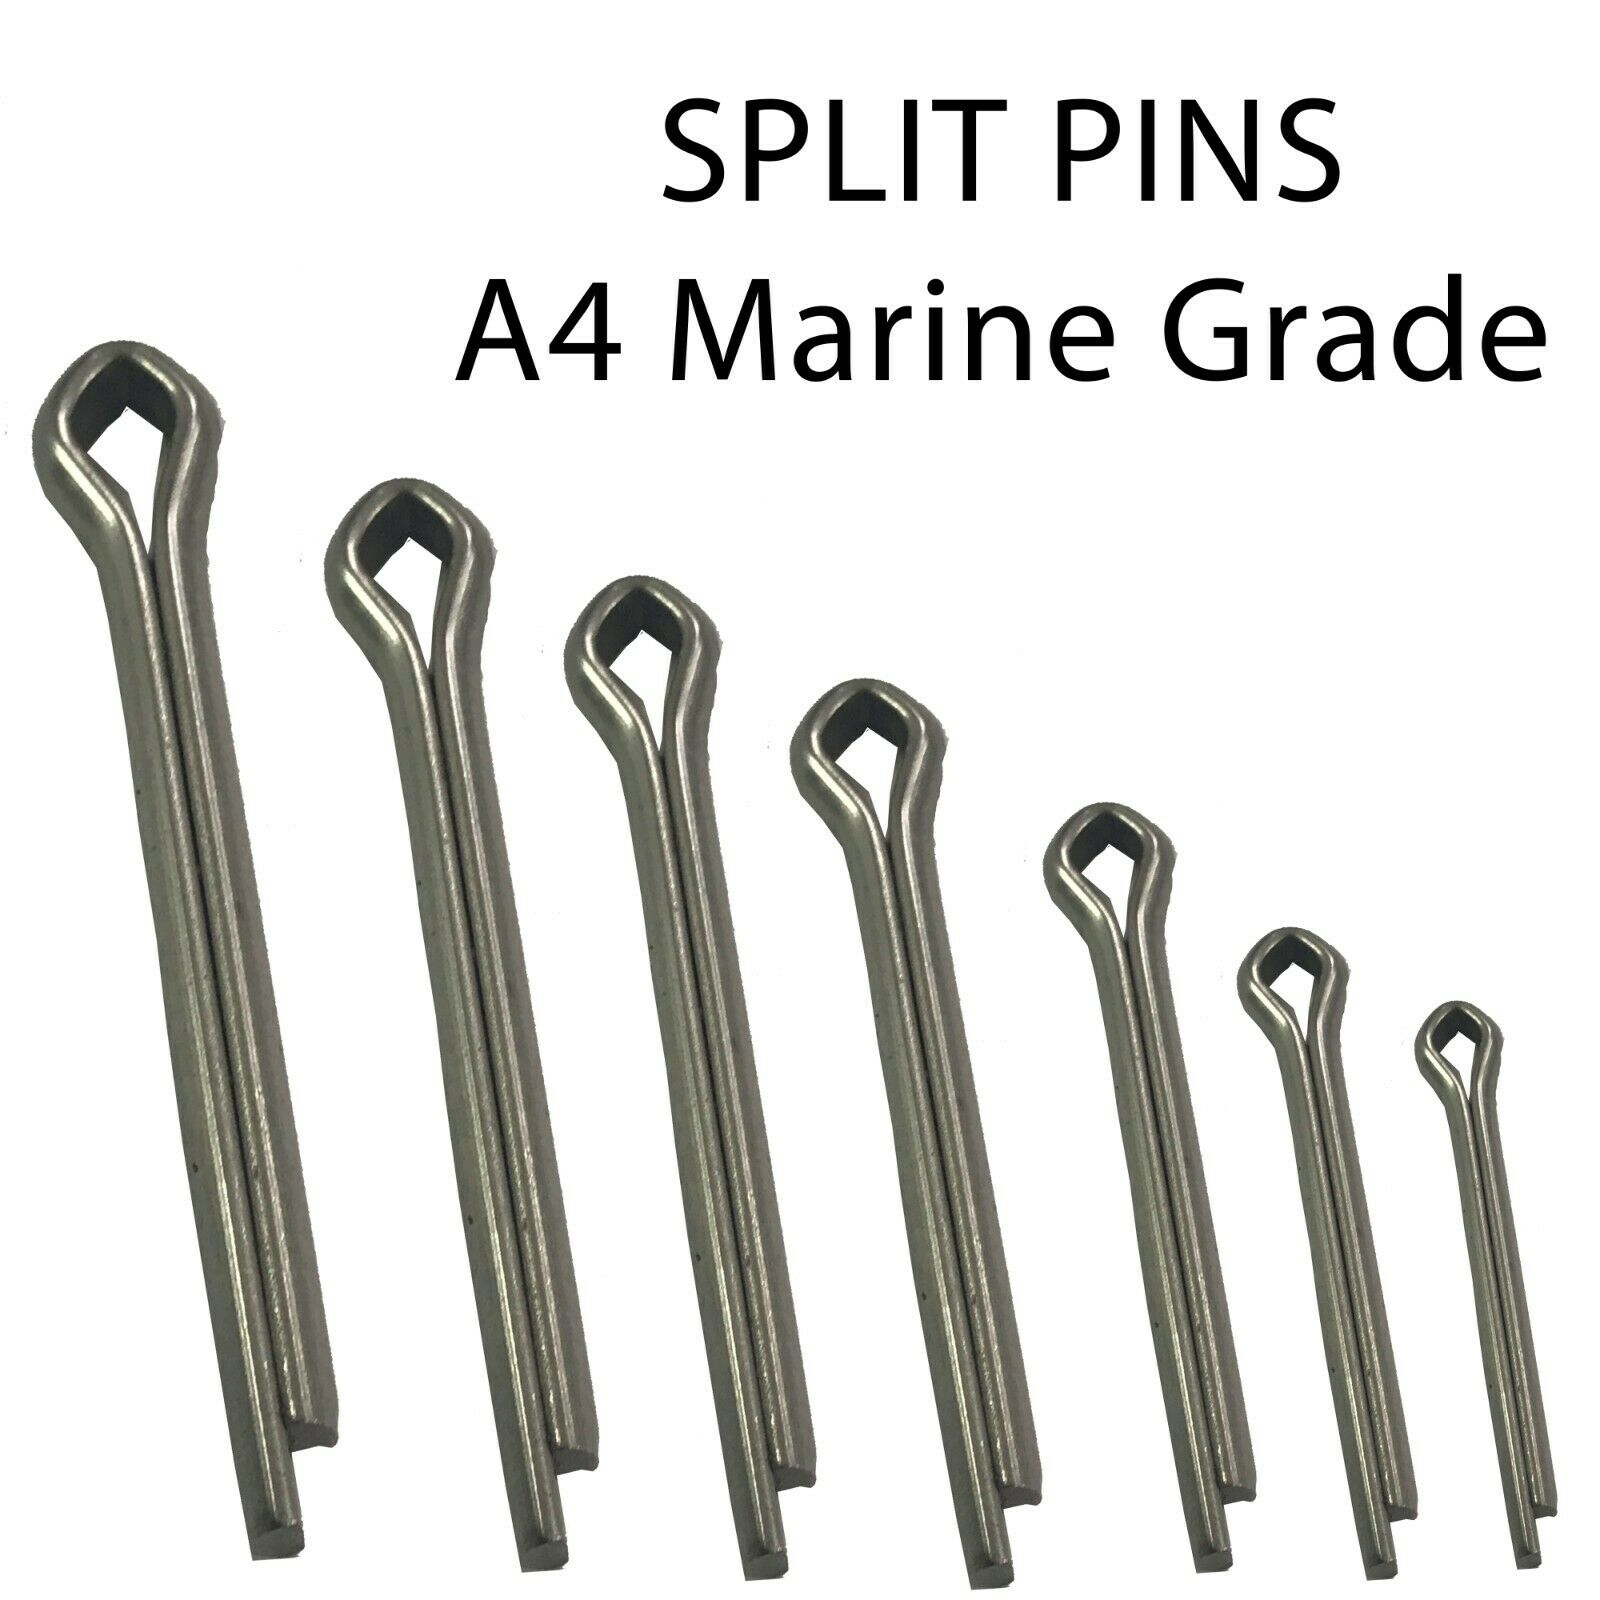 6 cotter pins